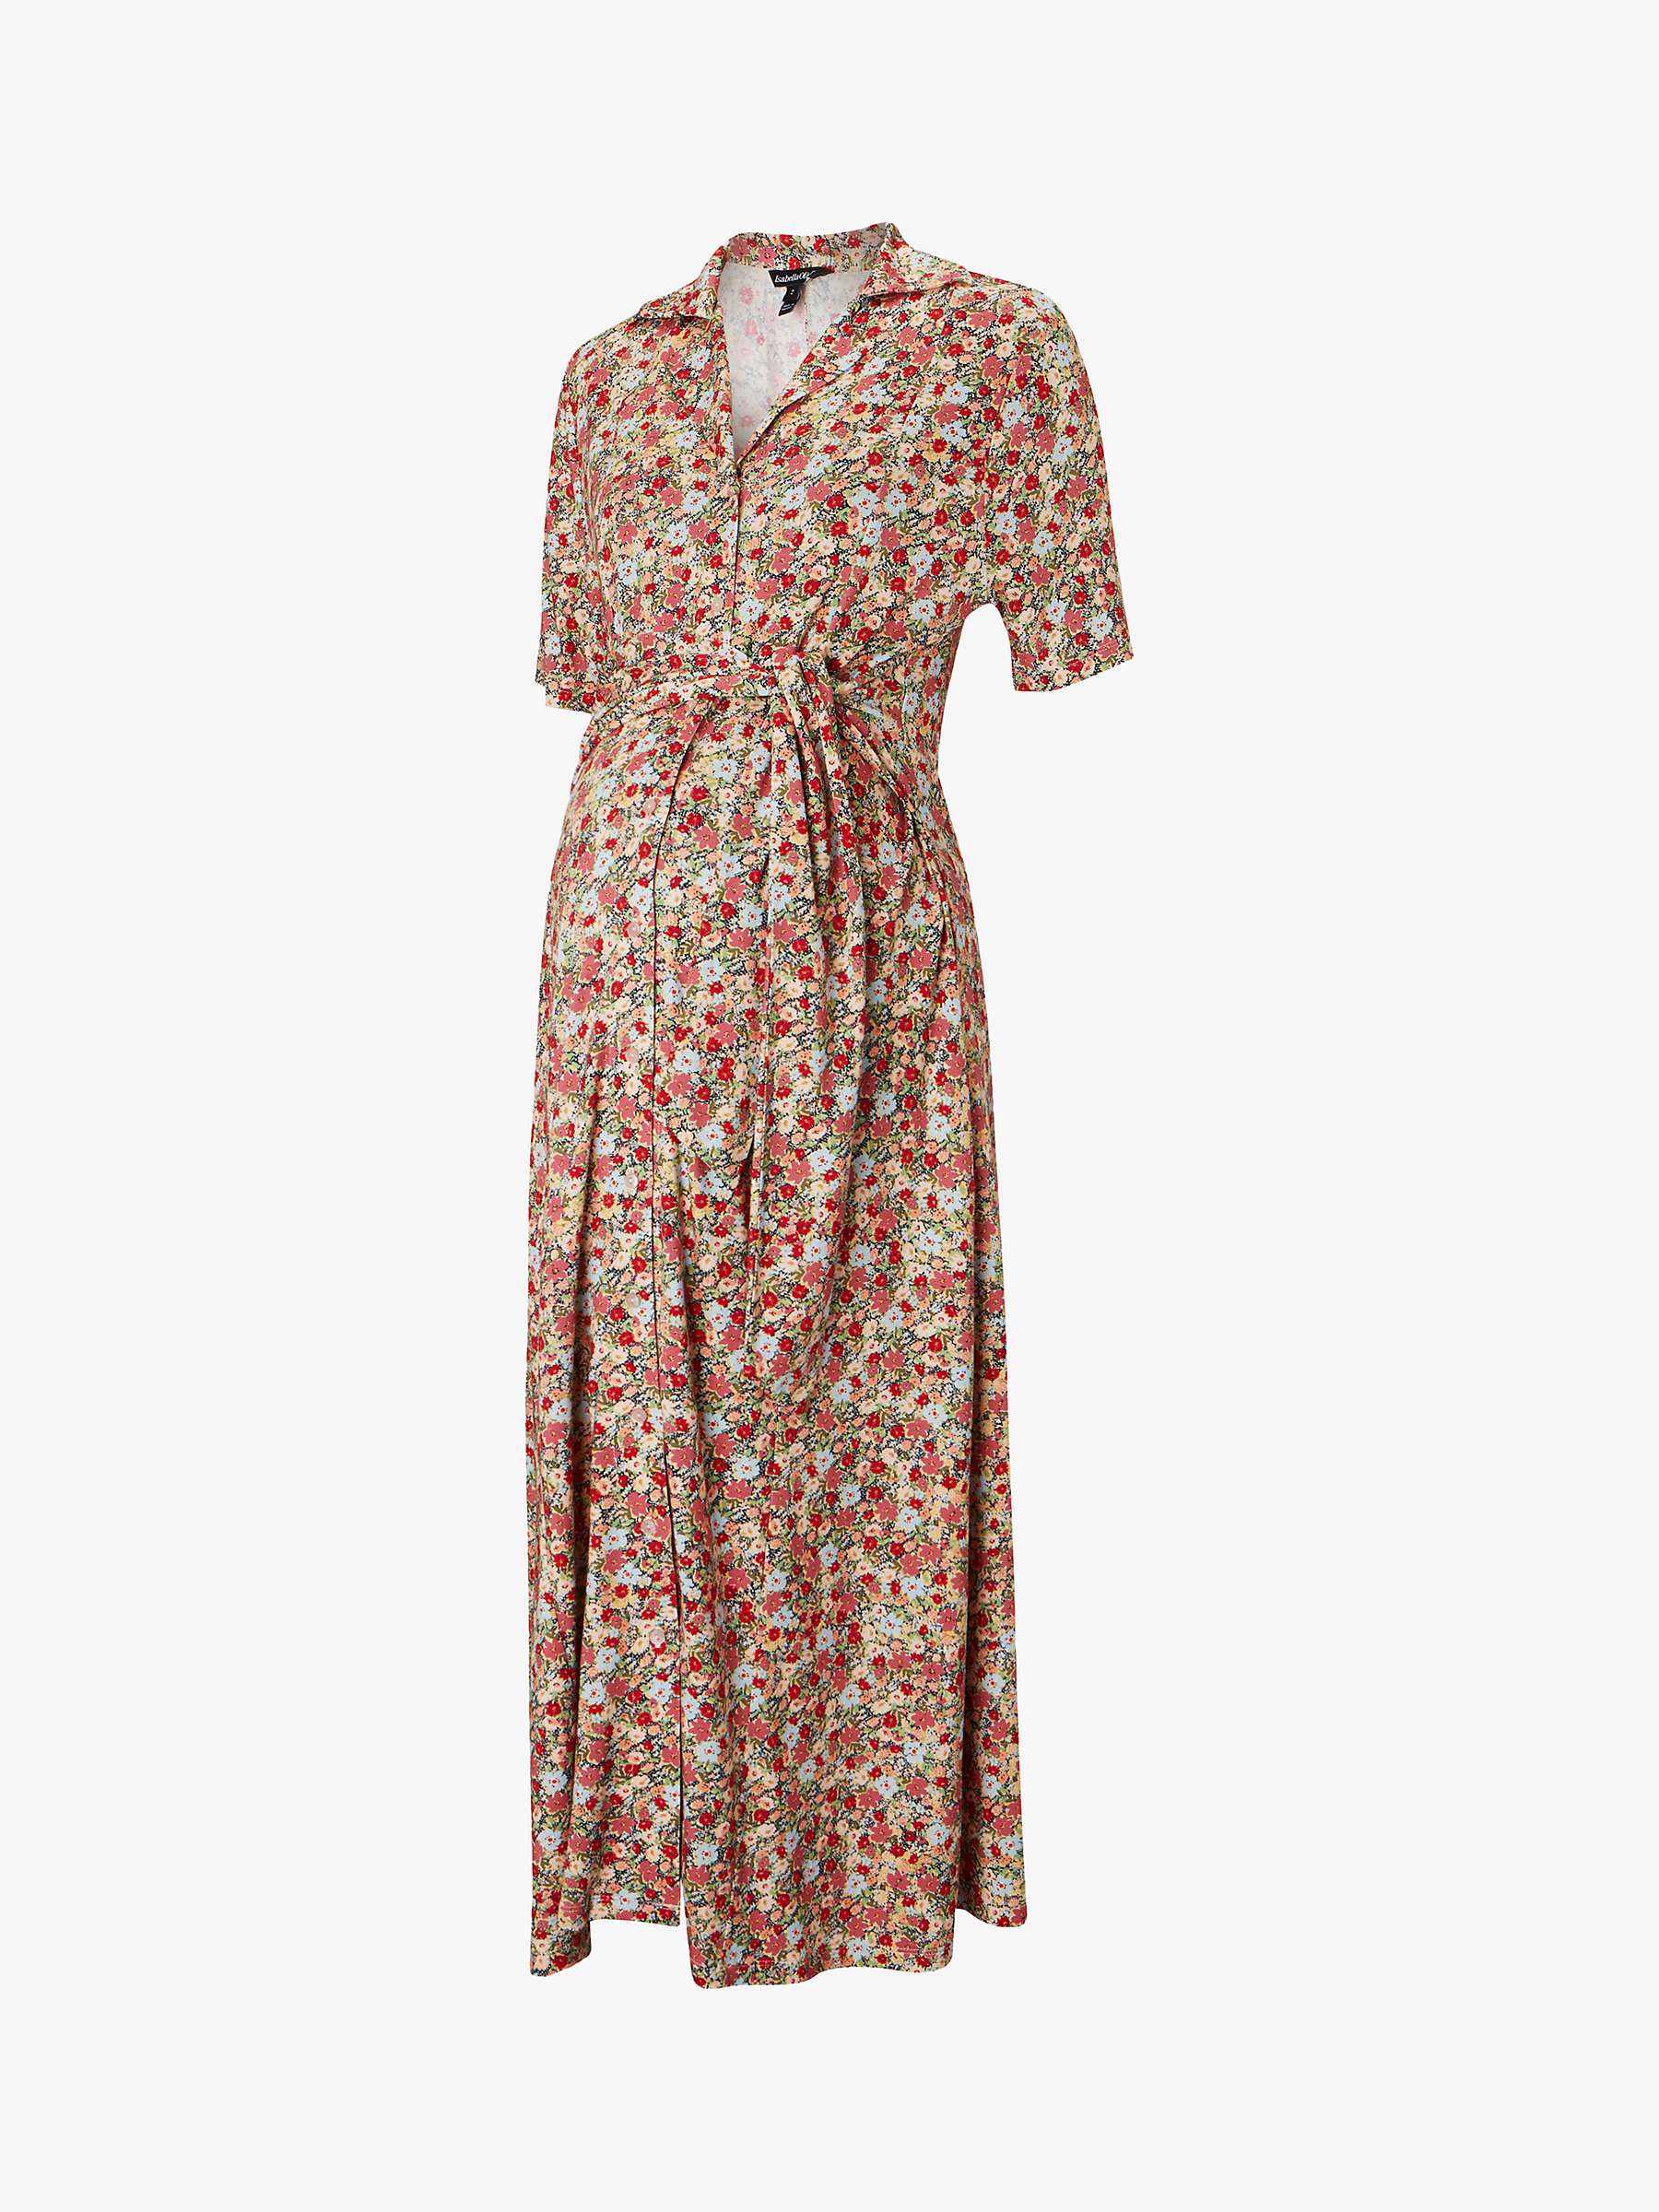 Buy Isabella Oliver Sienna Wildflower Floral LENZING™ ECOVERO™ Maternity Dress, Pink Online at johnlewis.com